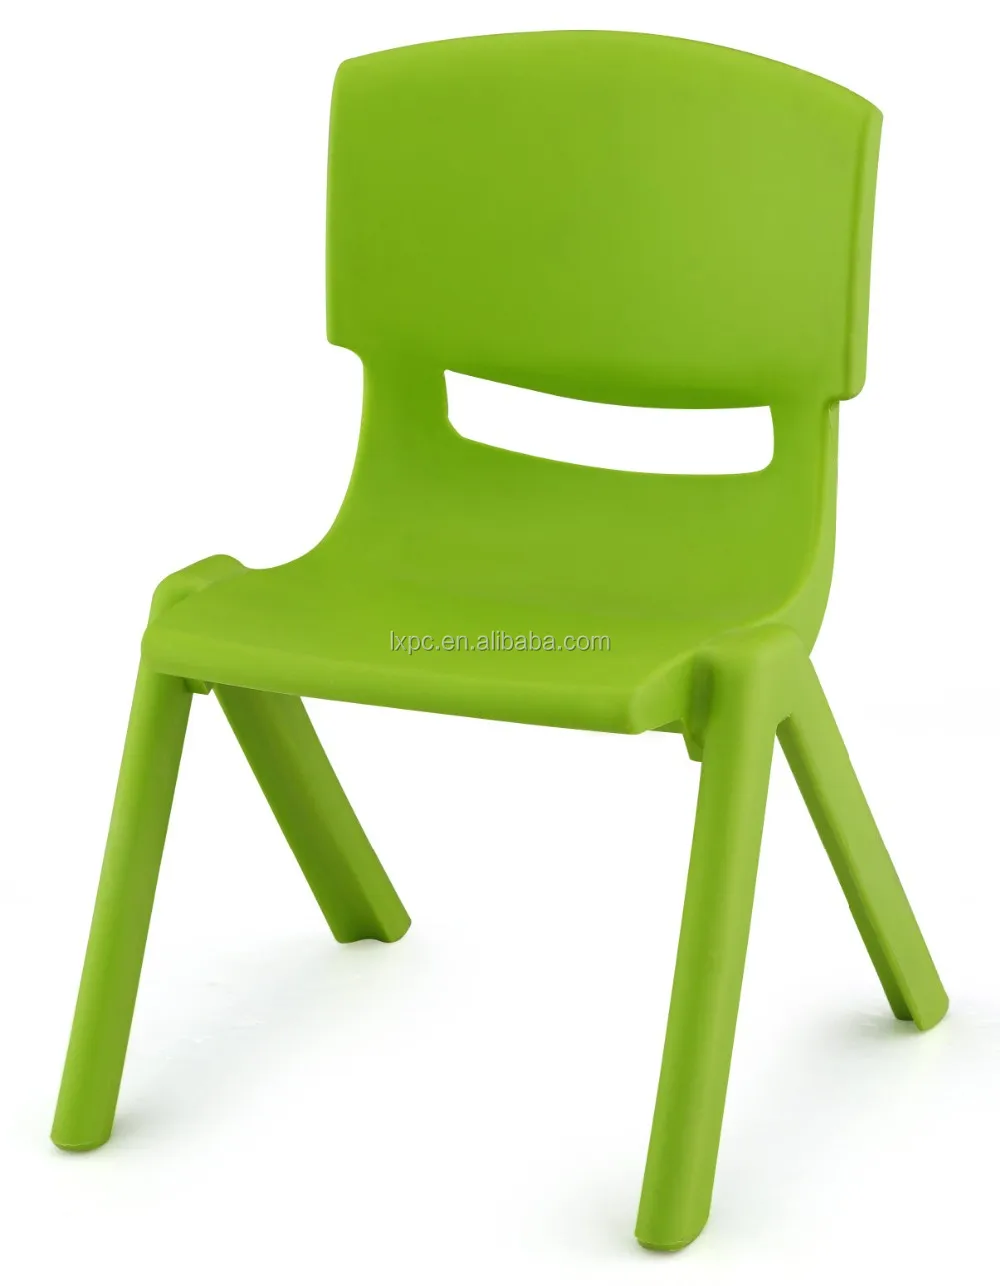 Any Color Available Cheap Wholesale Kids Plastic Party Chairs - Buy